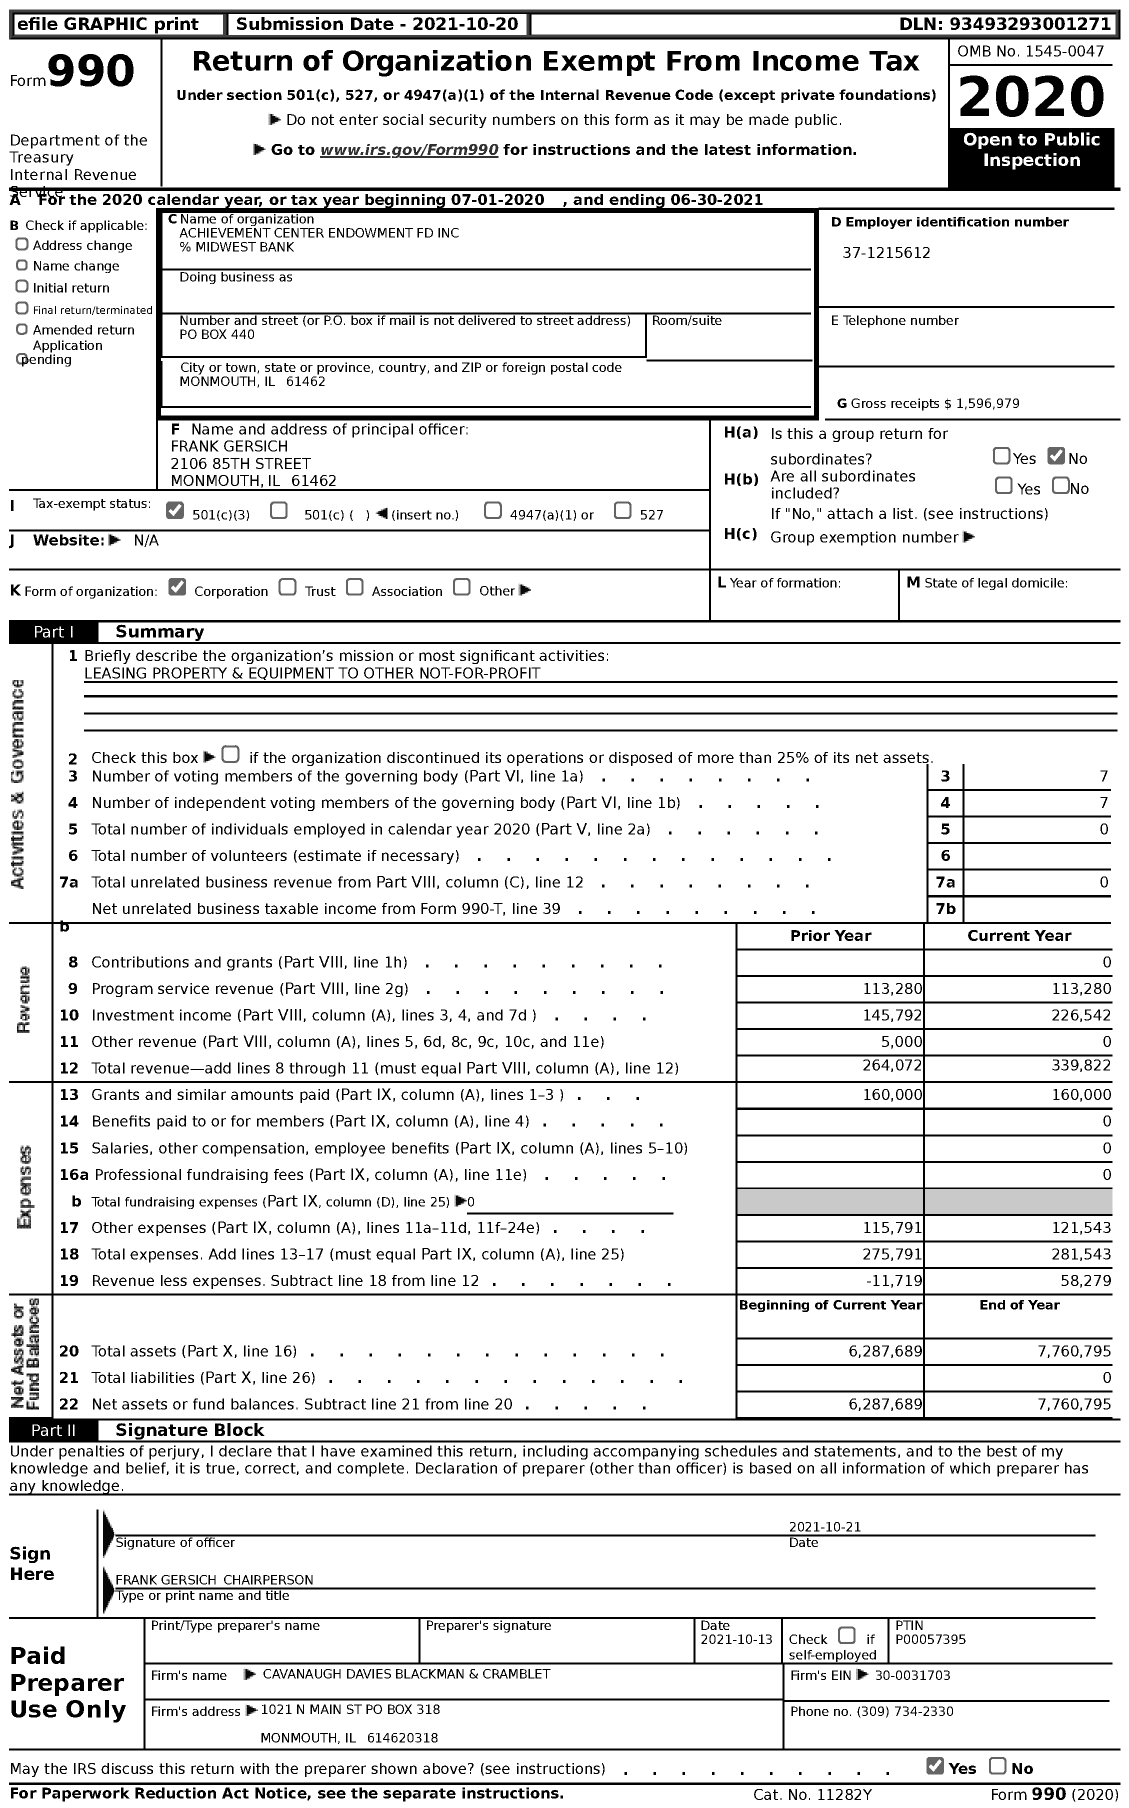 Image of first page of 2020 Form 990 for Achievement Center Endowment Fund